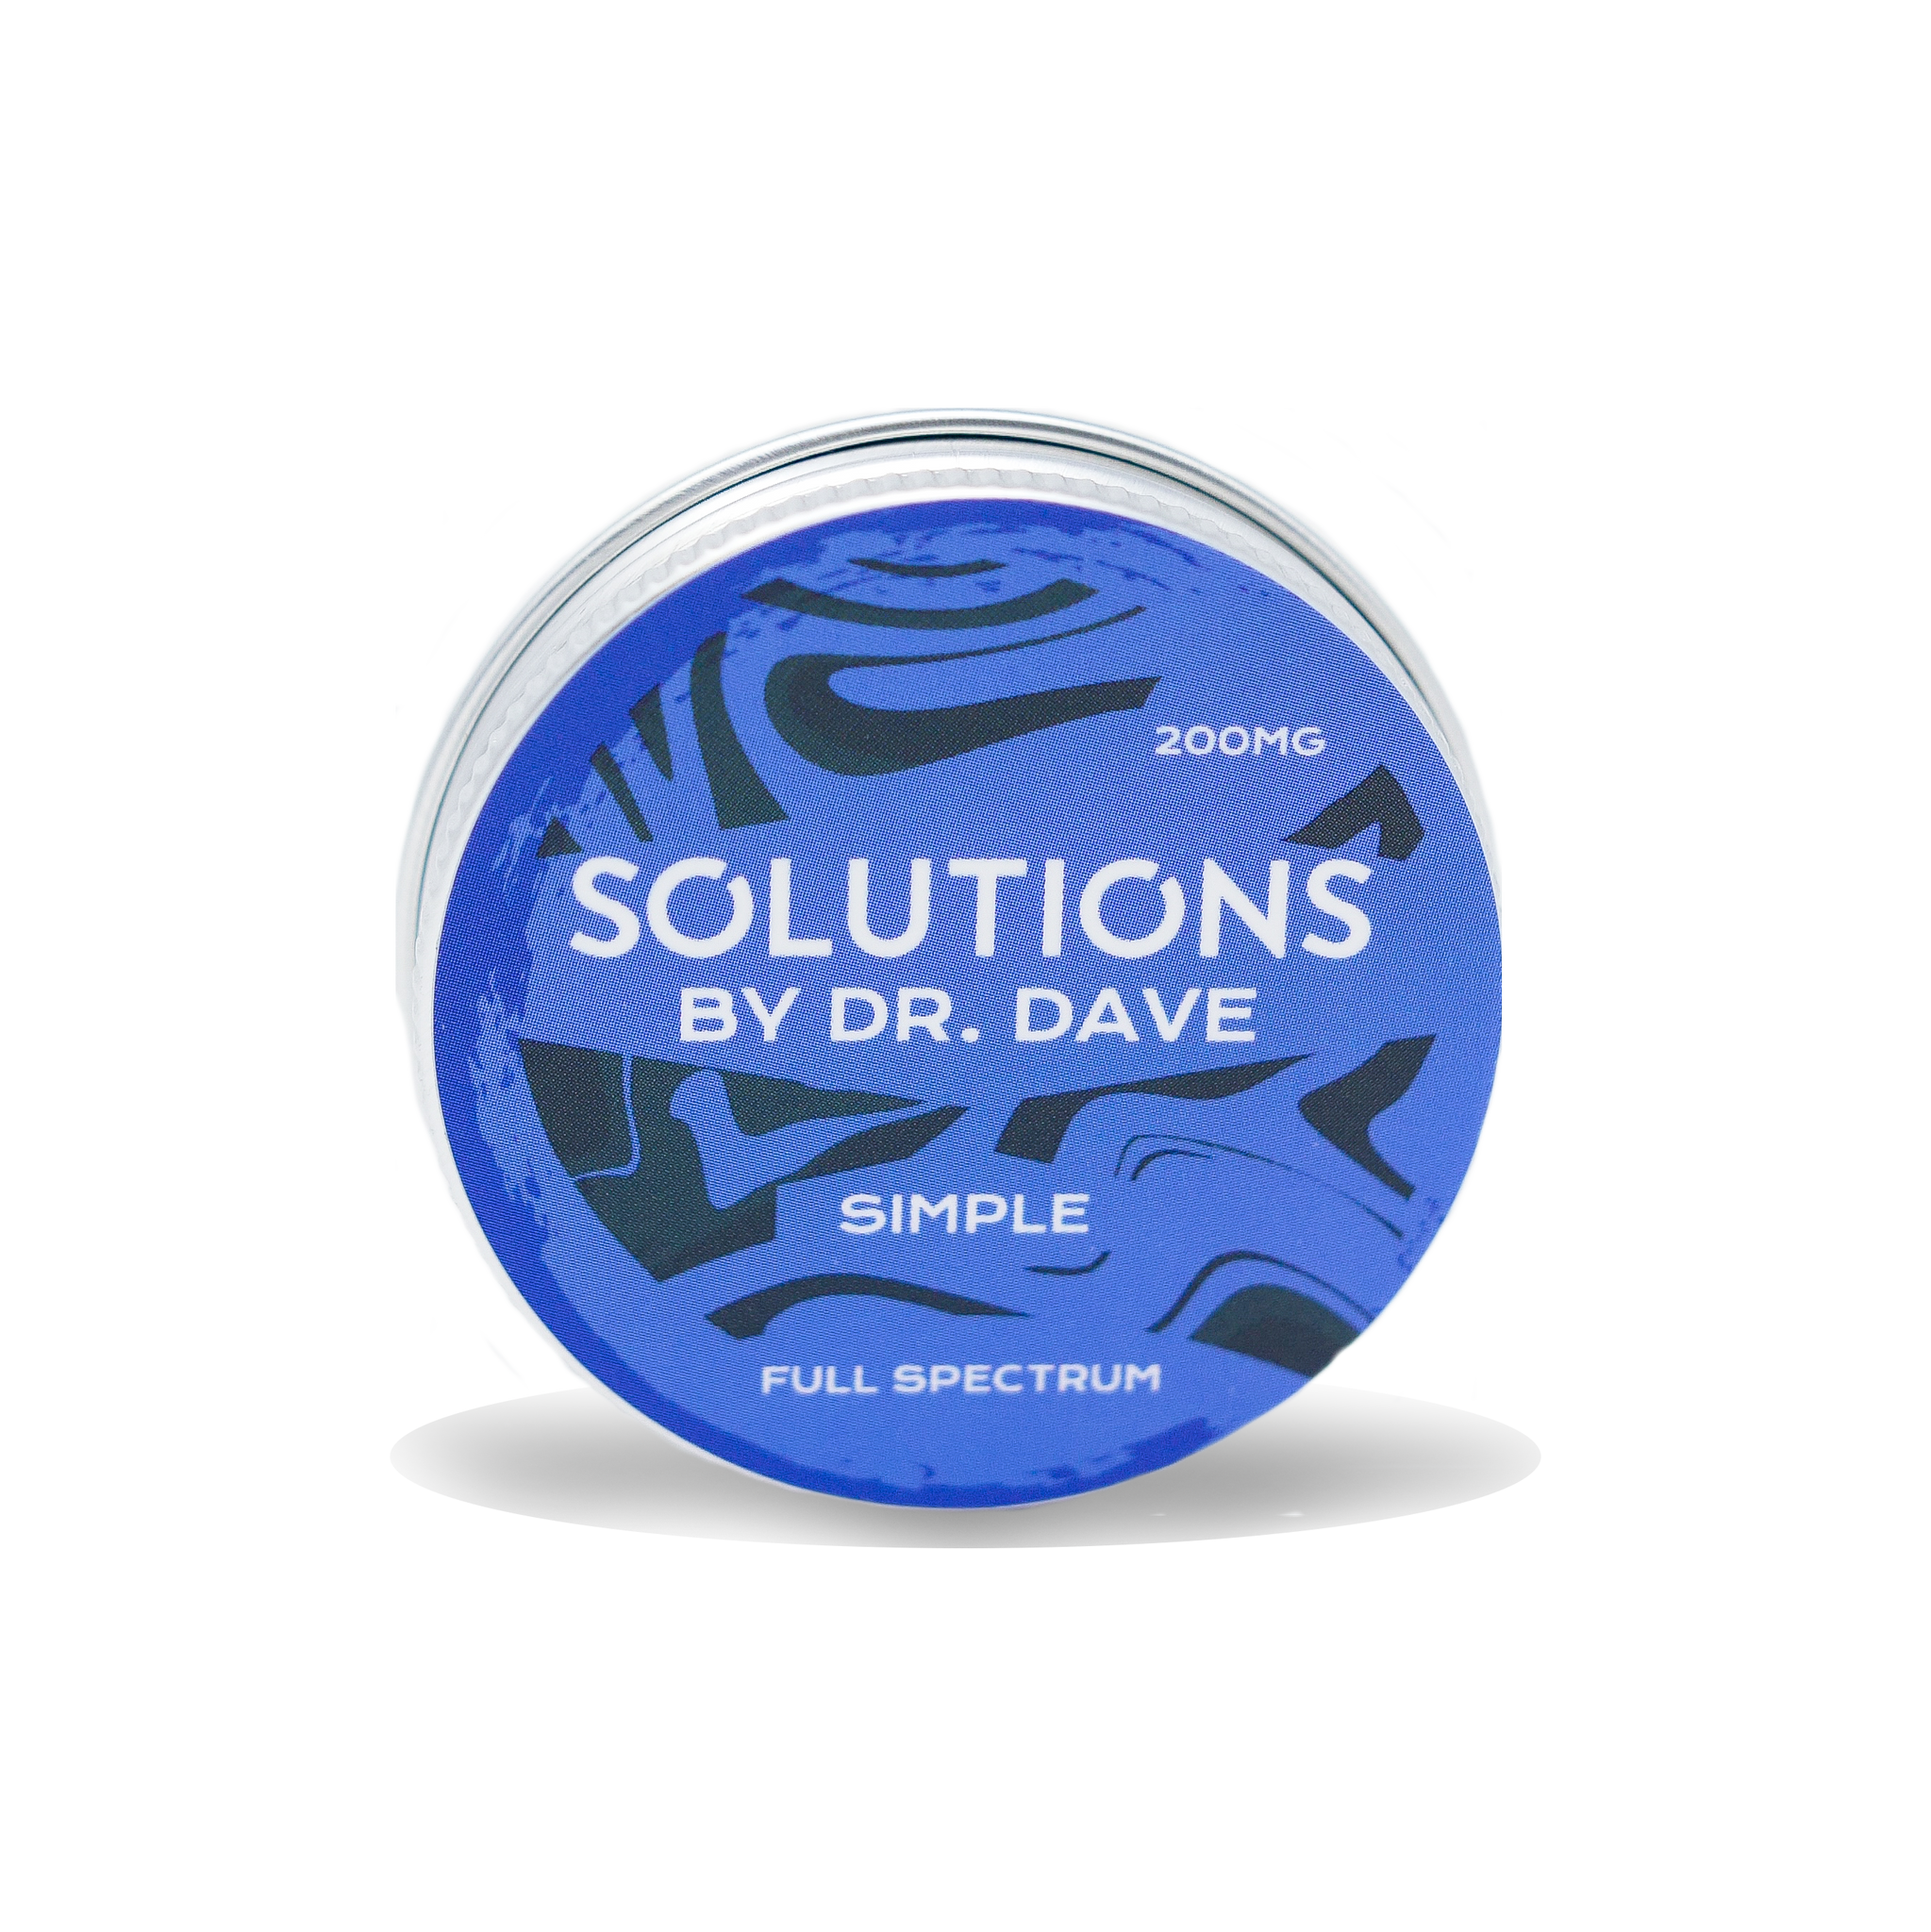 A picture of the unscented simple balm. It is a circular tin with a blue and black swirled pattern. The label says 200 milligram Solutions by doctor Dave Simple, full spectrum.